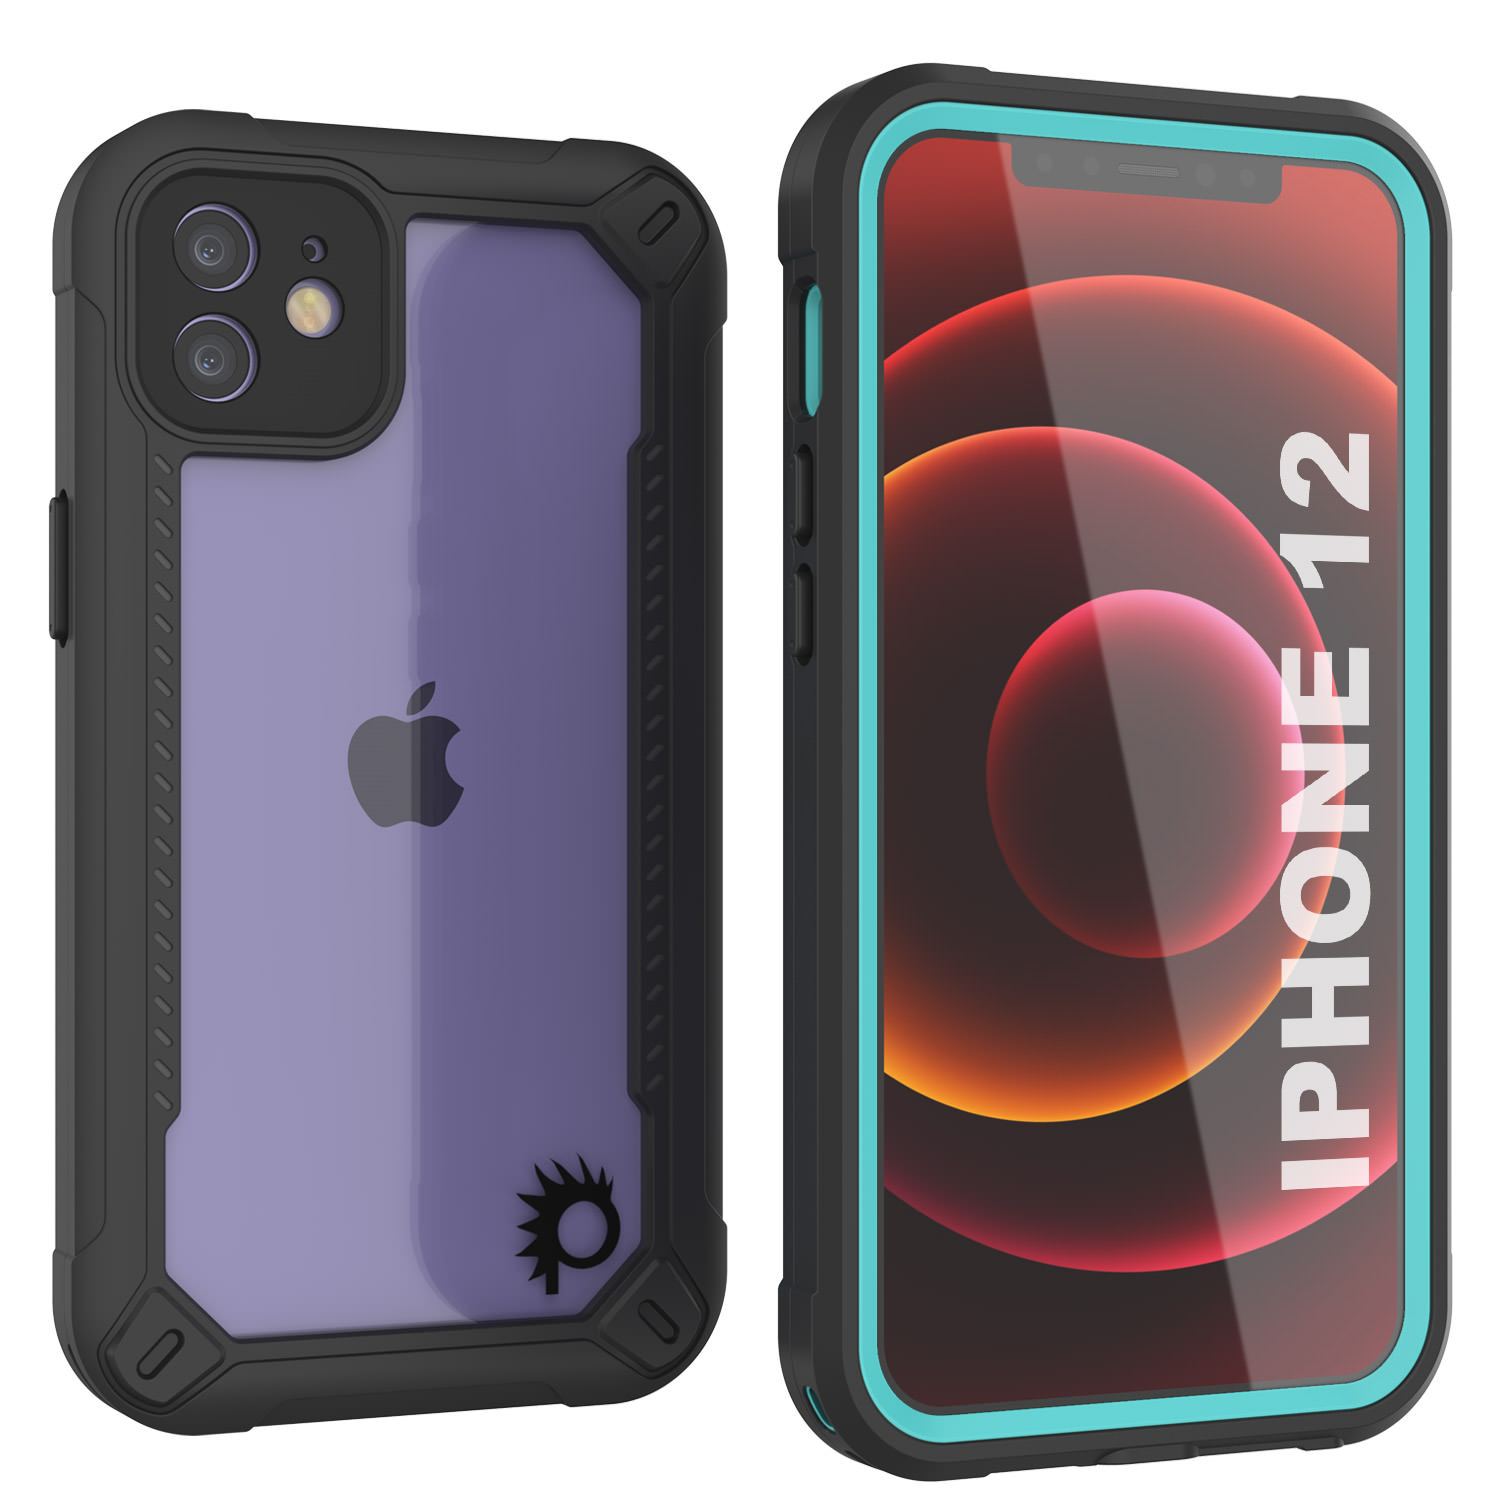 iPhone 12 Waterproof IP68 Case, Punkcase [teal]  [Maximus Series] [Slim Fit] [IP68 Certified] [Shockresistant] Clear Armor Cover with Screen Protector | Ultimate Protection